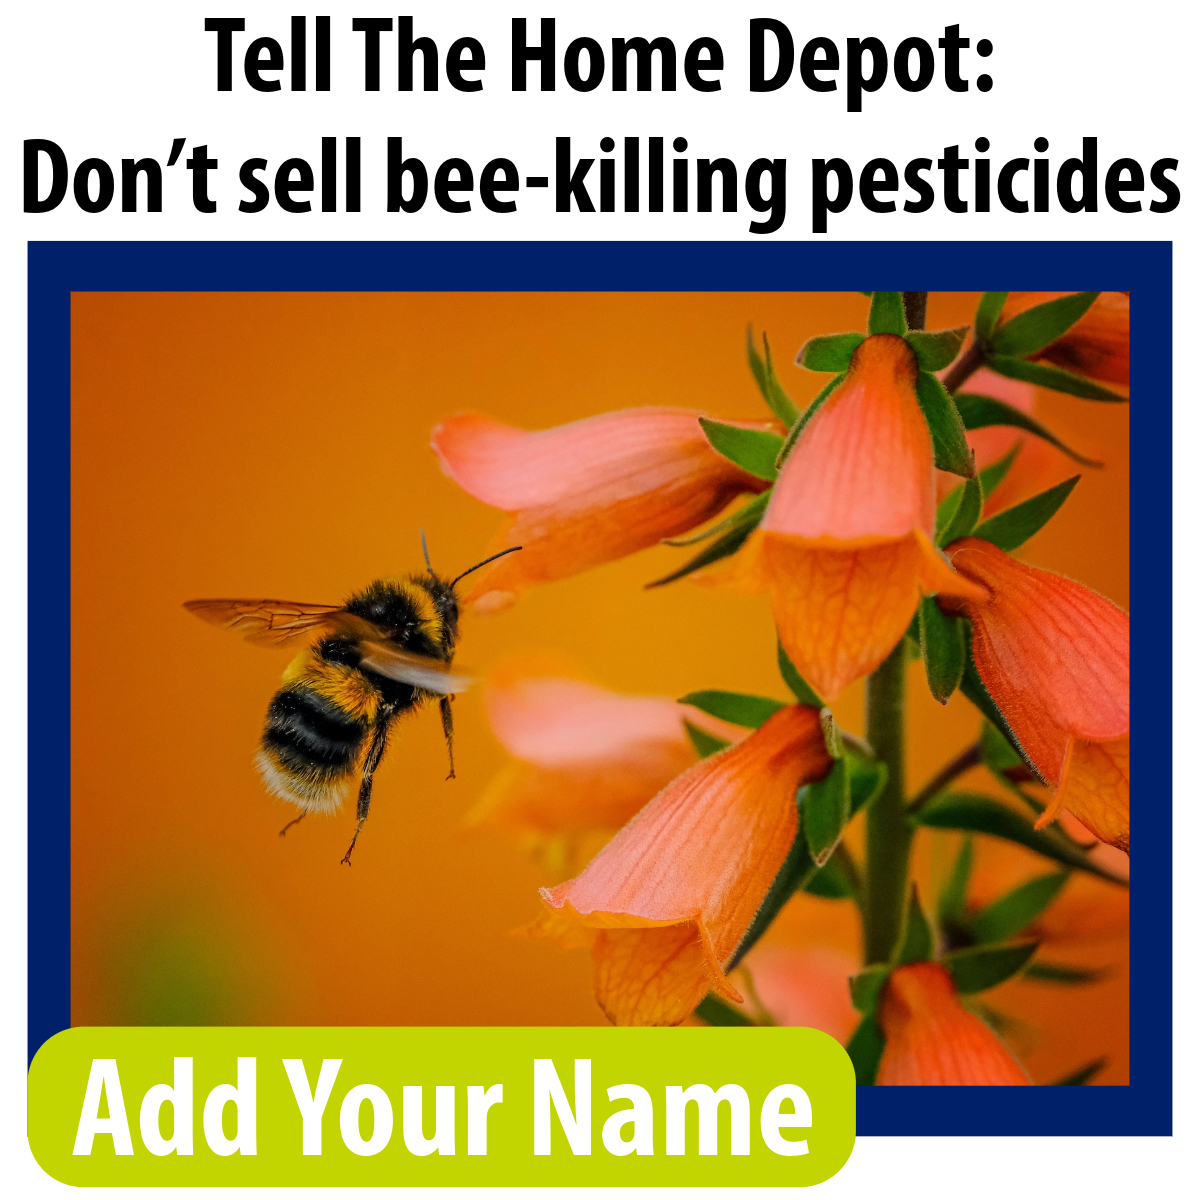 Tell The Home Depot: Don't sell bee-killing pesticides. Add your name